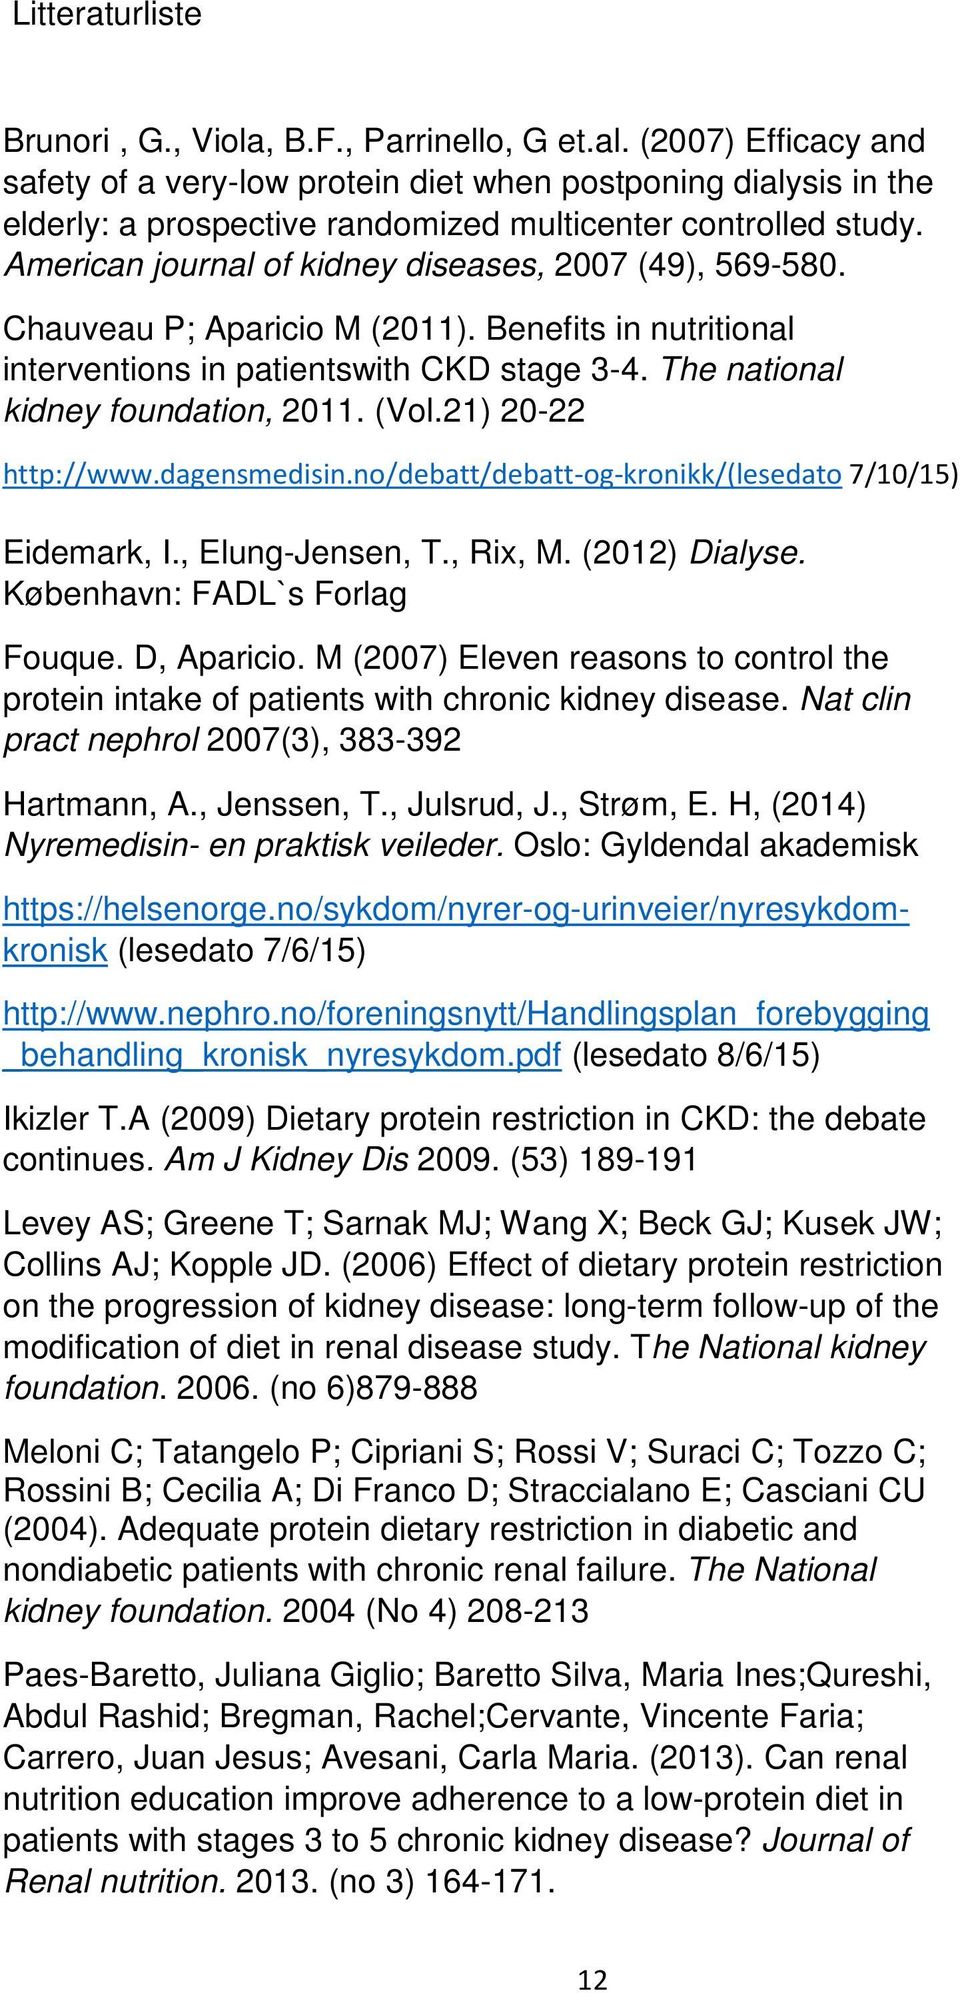 American journal of kidney diseases, 2007 (49), 569-580. Chauveau P; Aparicio M (2011). Benefits in nutritional interventions in patientswith CKD stage 3-4. The national kidney foundation, 2011. (Vol.